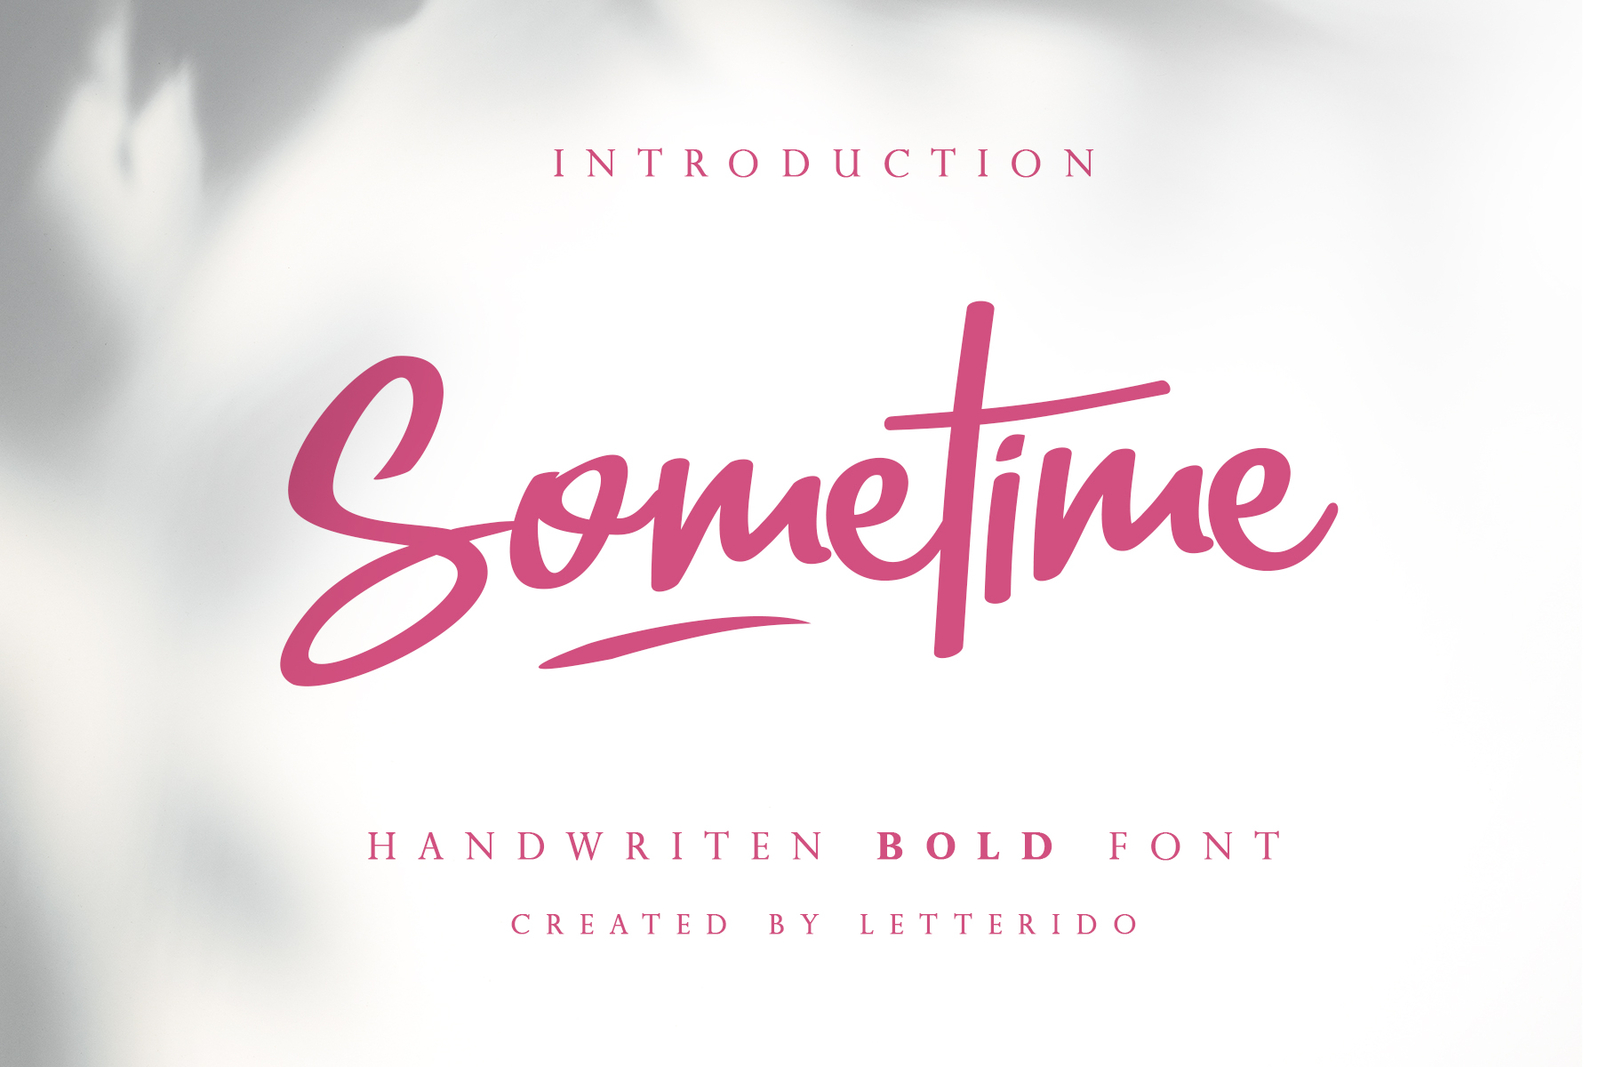 Sometime - Free Font by Ratin Creative on Dribbble